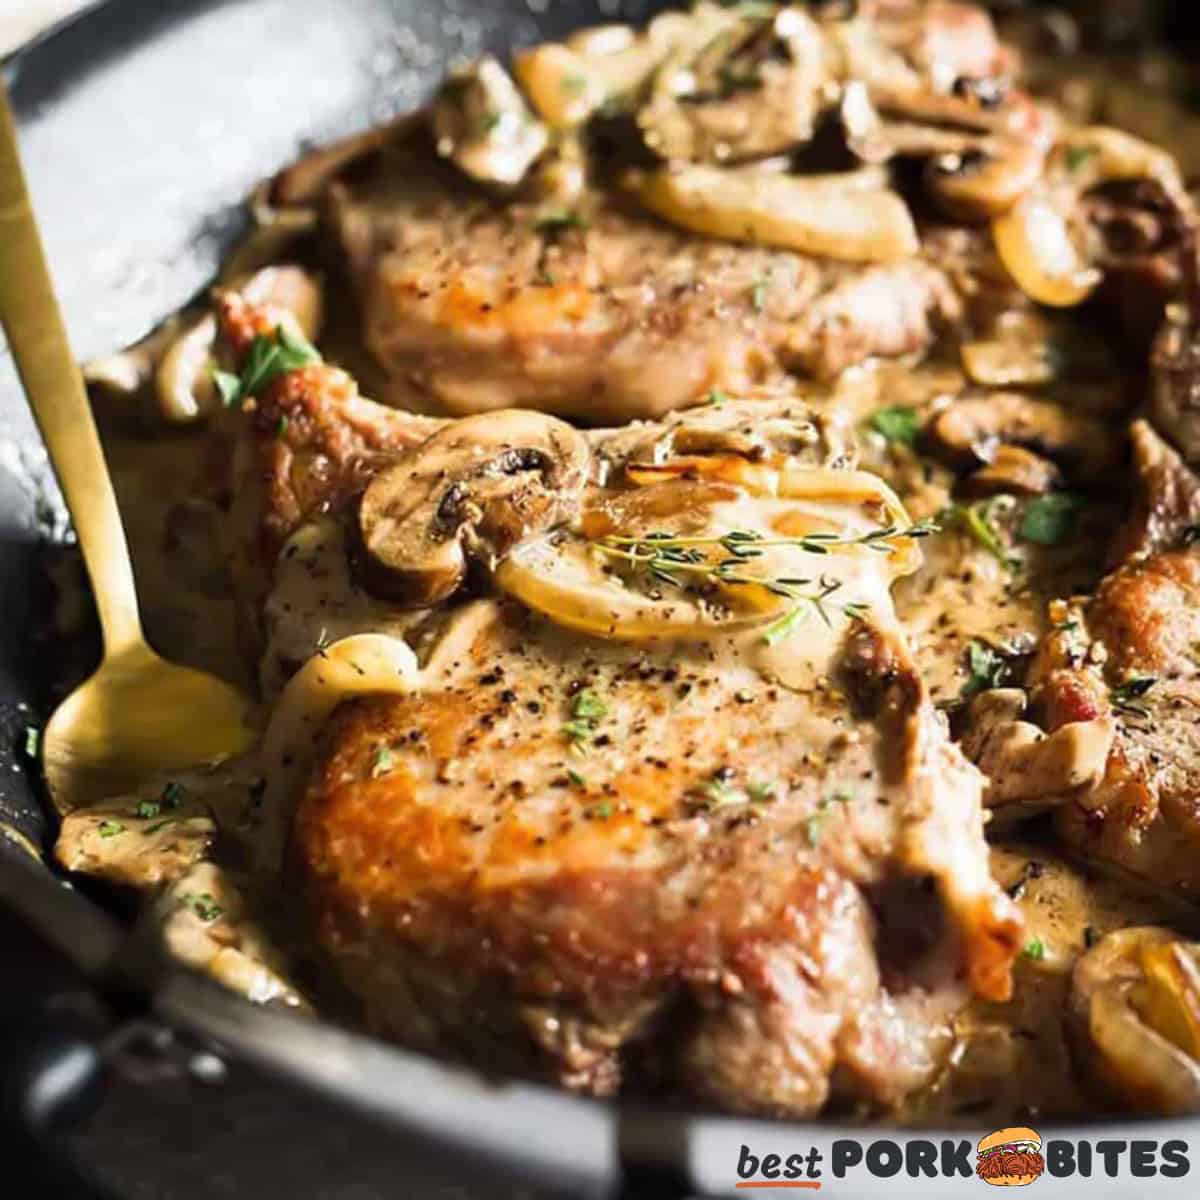 pork chops smothered with mushrooms up close in a black pan